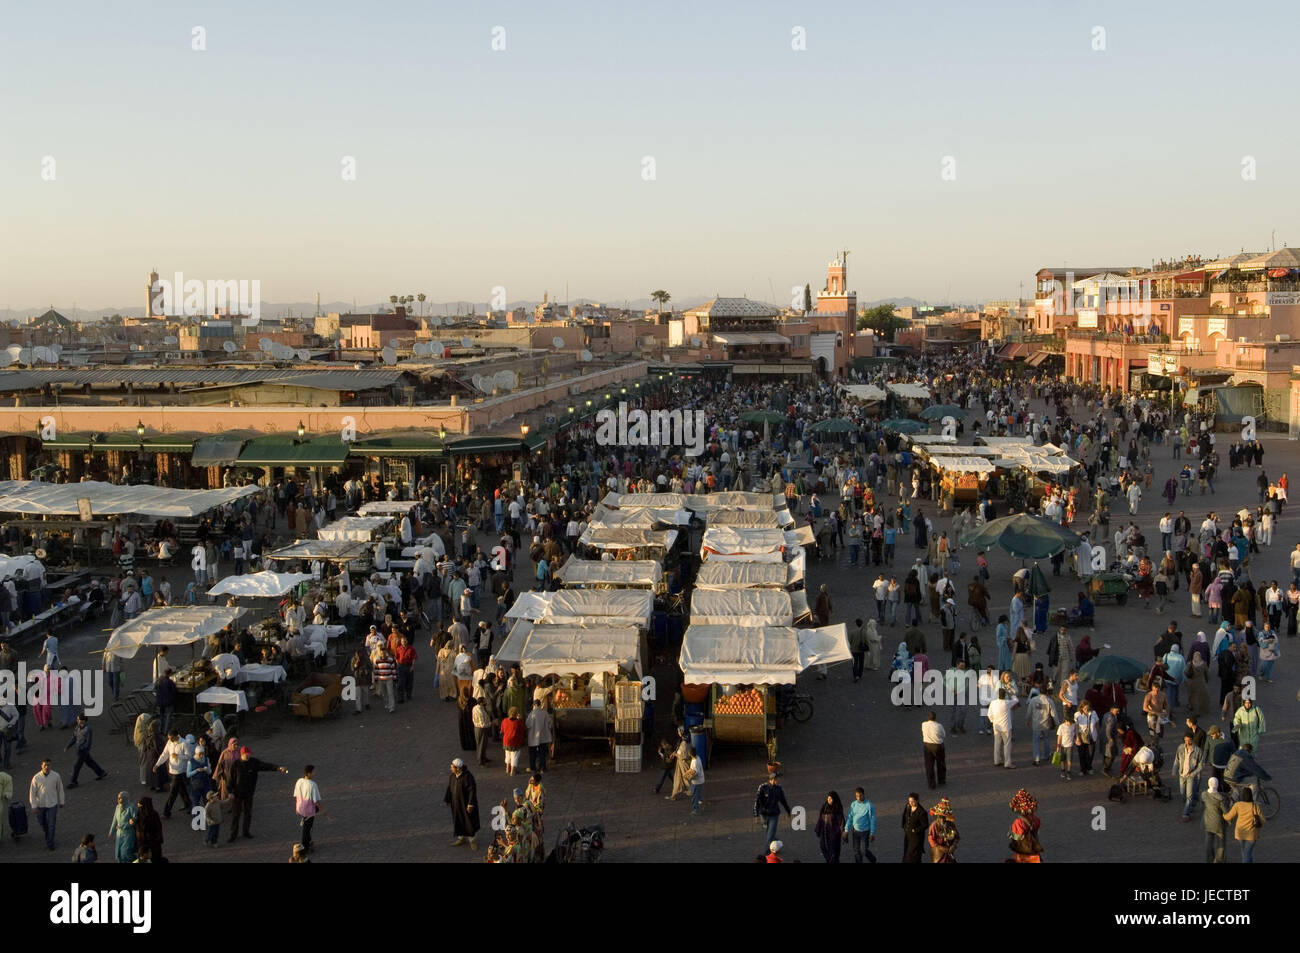 Morocco, Marrakech, space Jemaa-El-Fna, market, crowd of people, evening light, Africa, North Africa, place of interest, town, houses, buildings, people, tourists, visitors, locals, sales booths, outside, overview, market beating out, Stock Photo